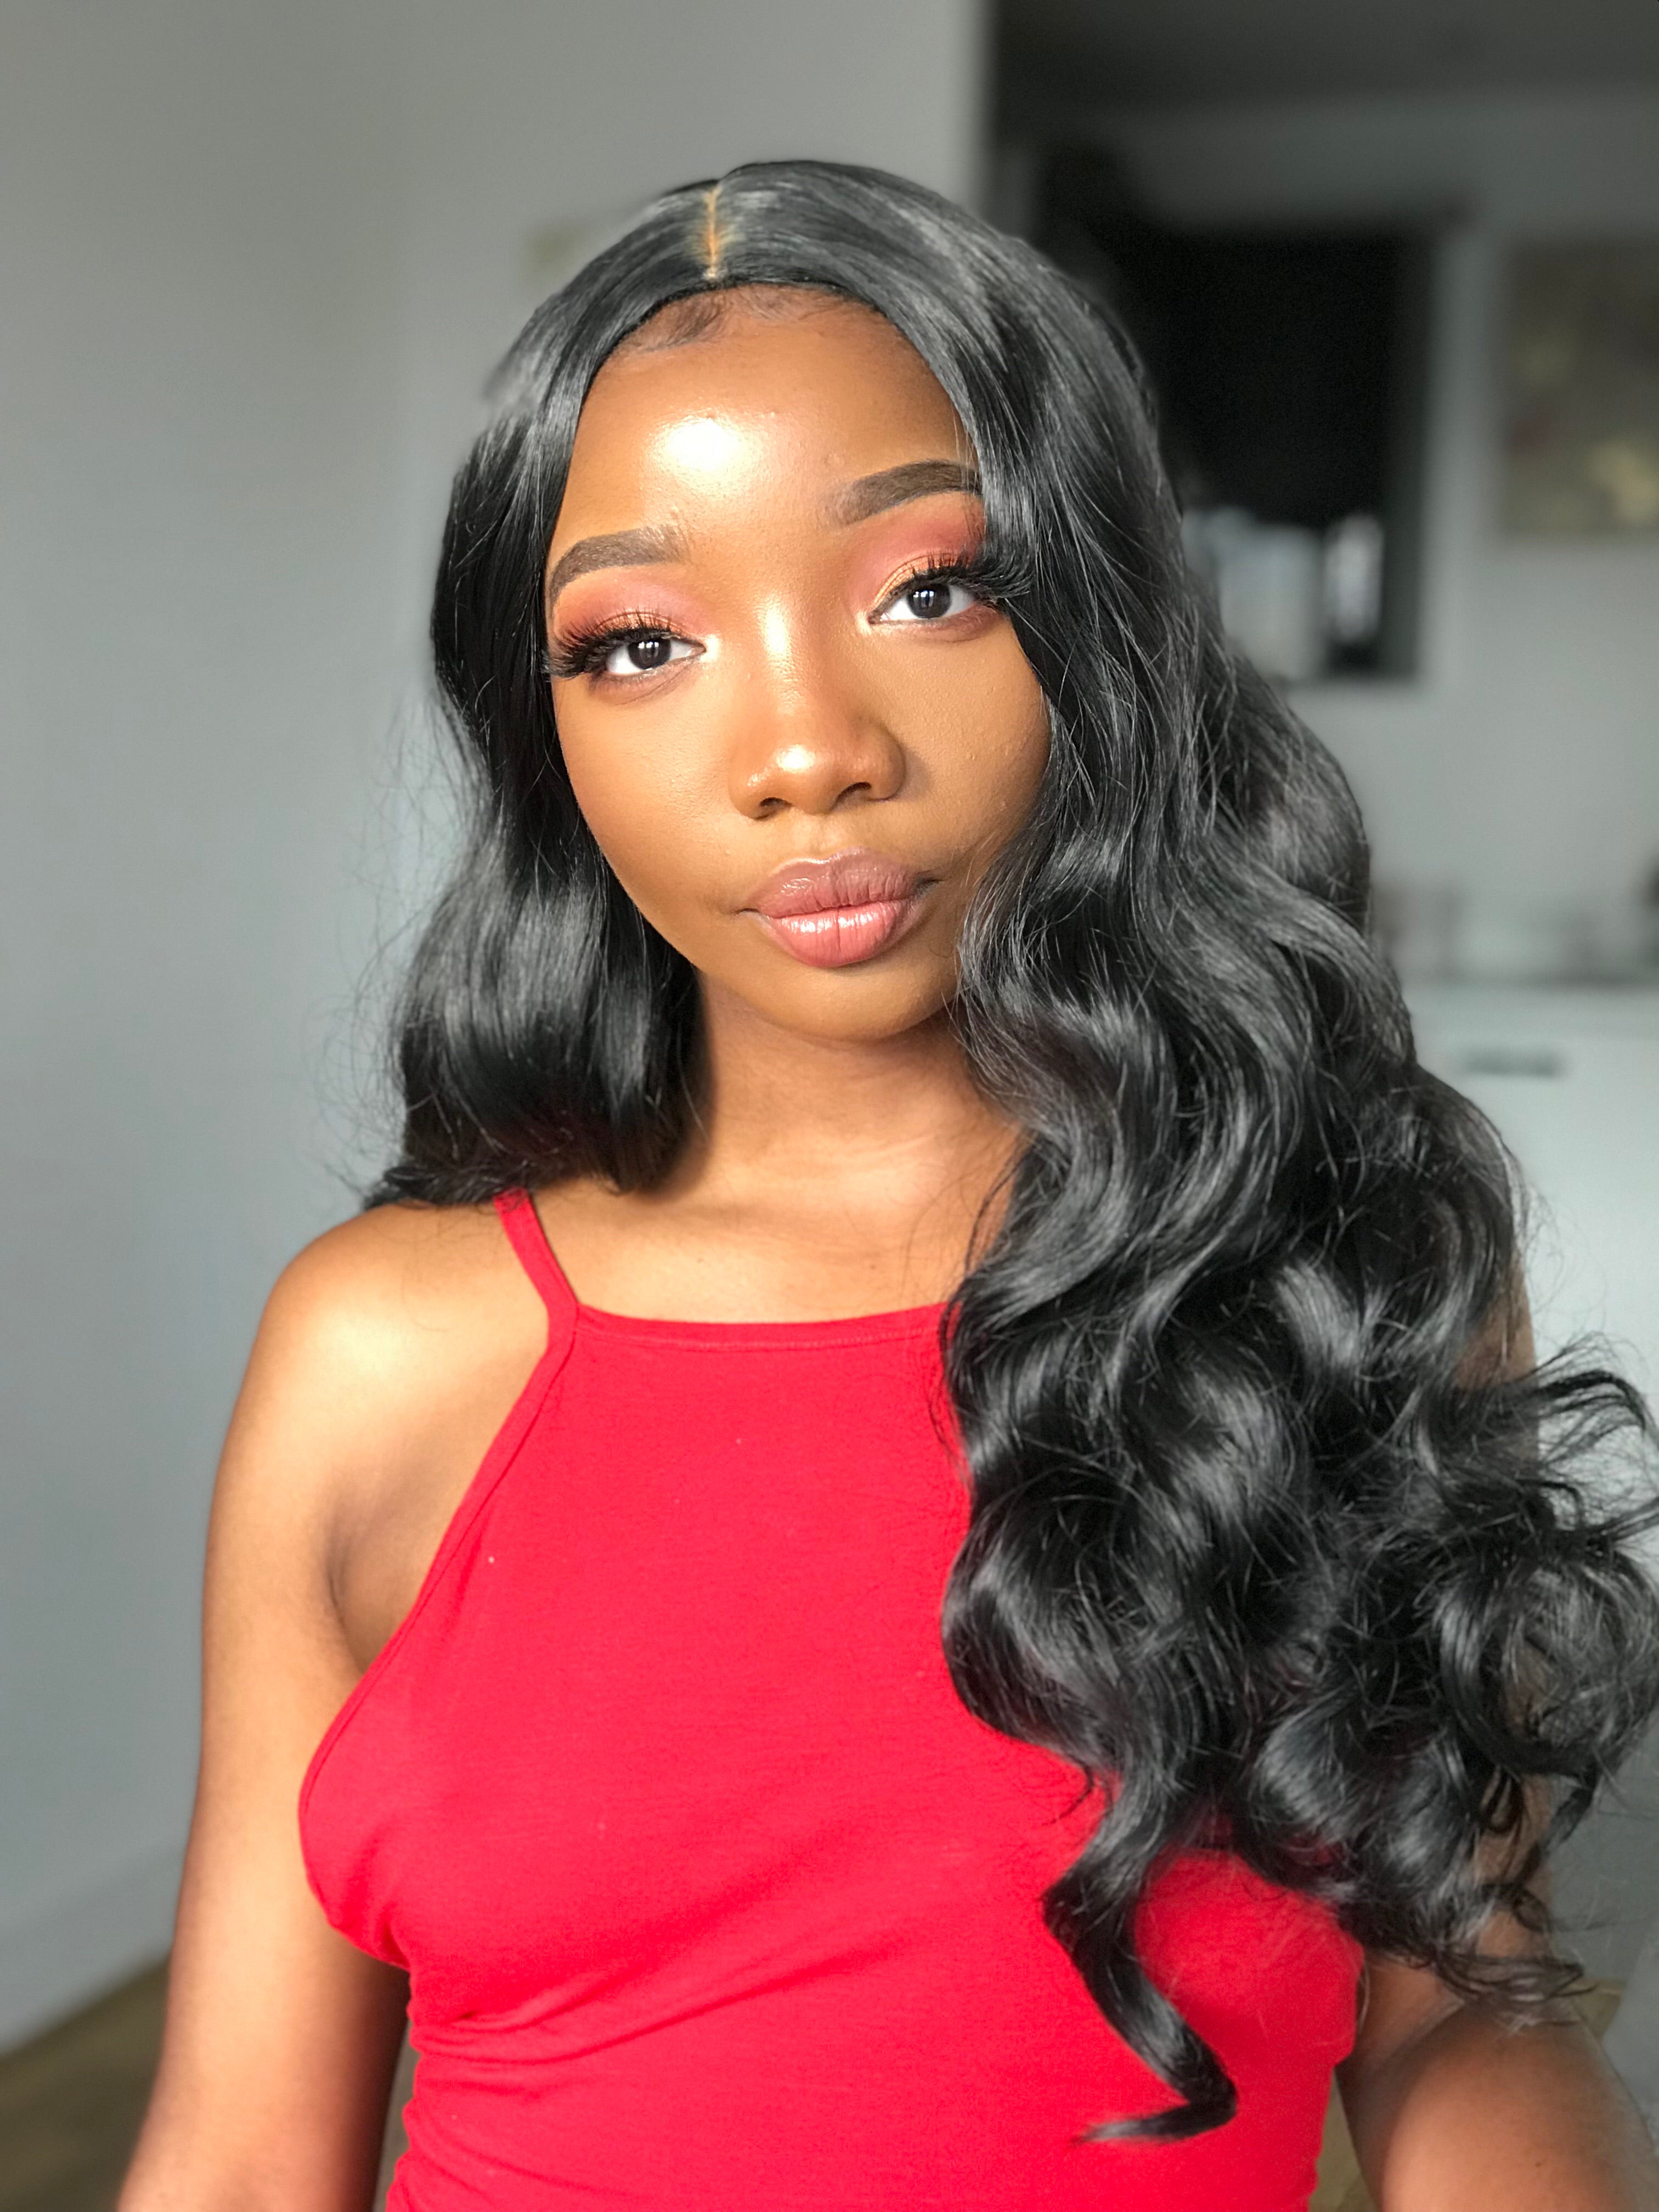 Adeola: 26-Inch Long Black Heat Resistant Synthetic Wig